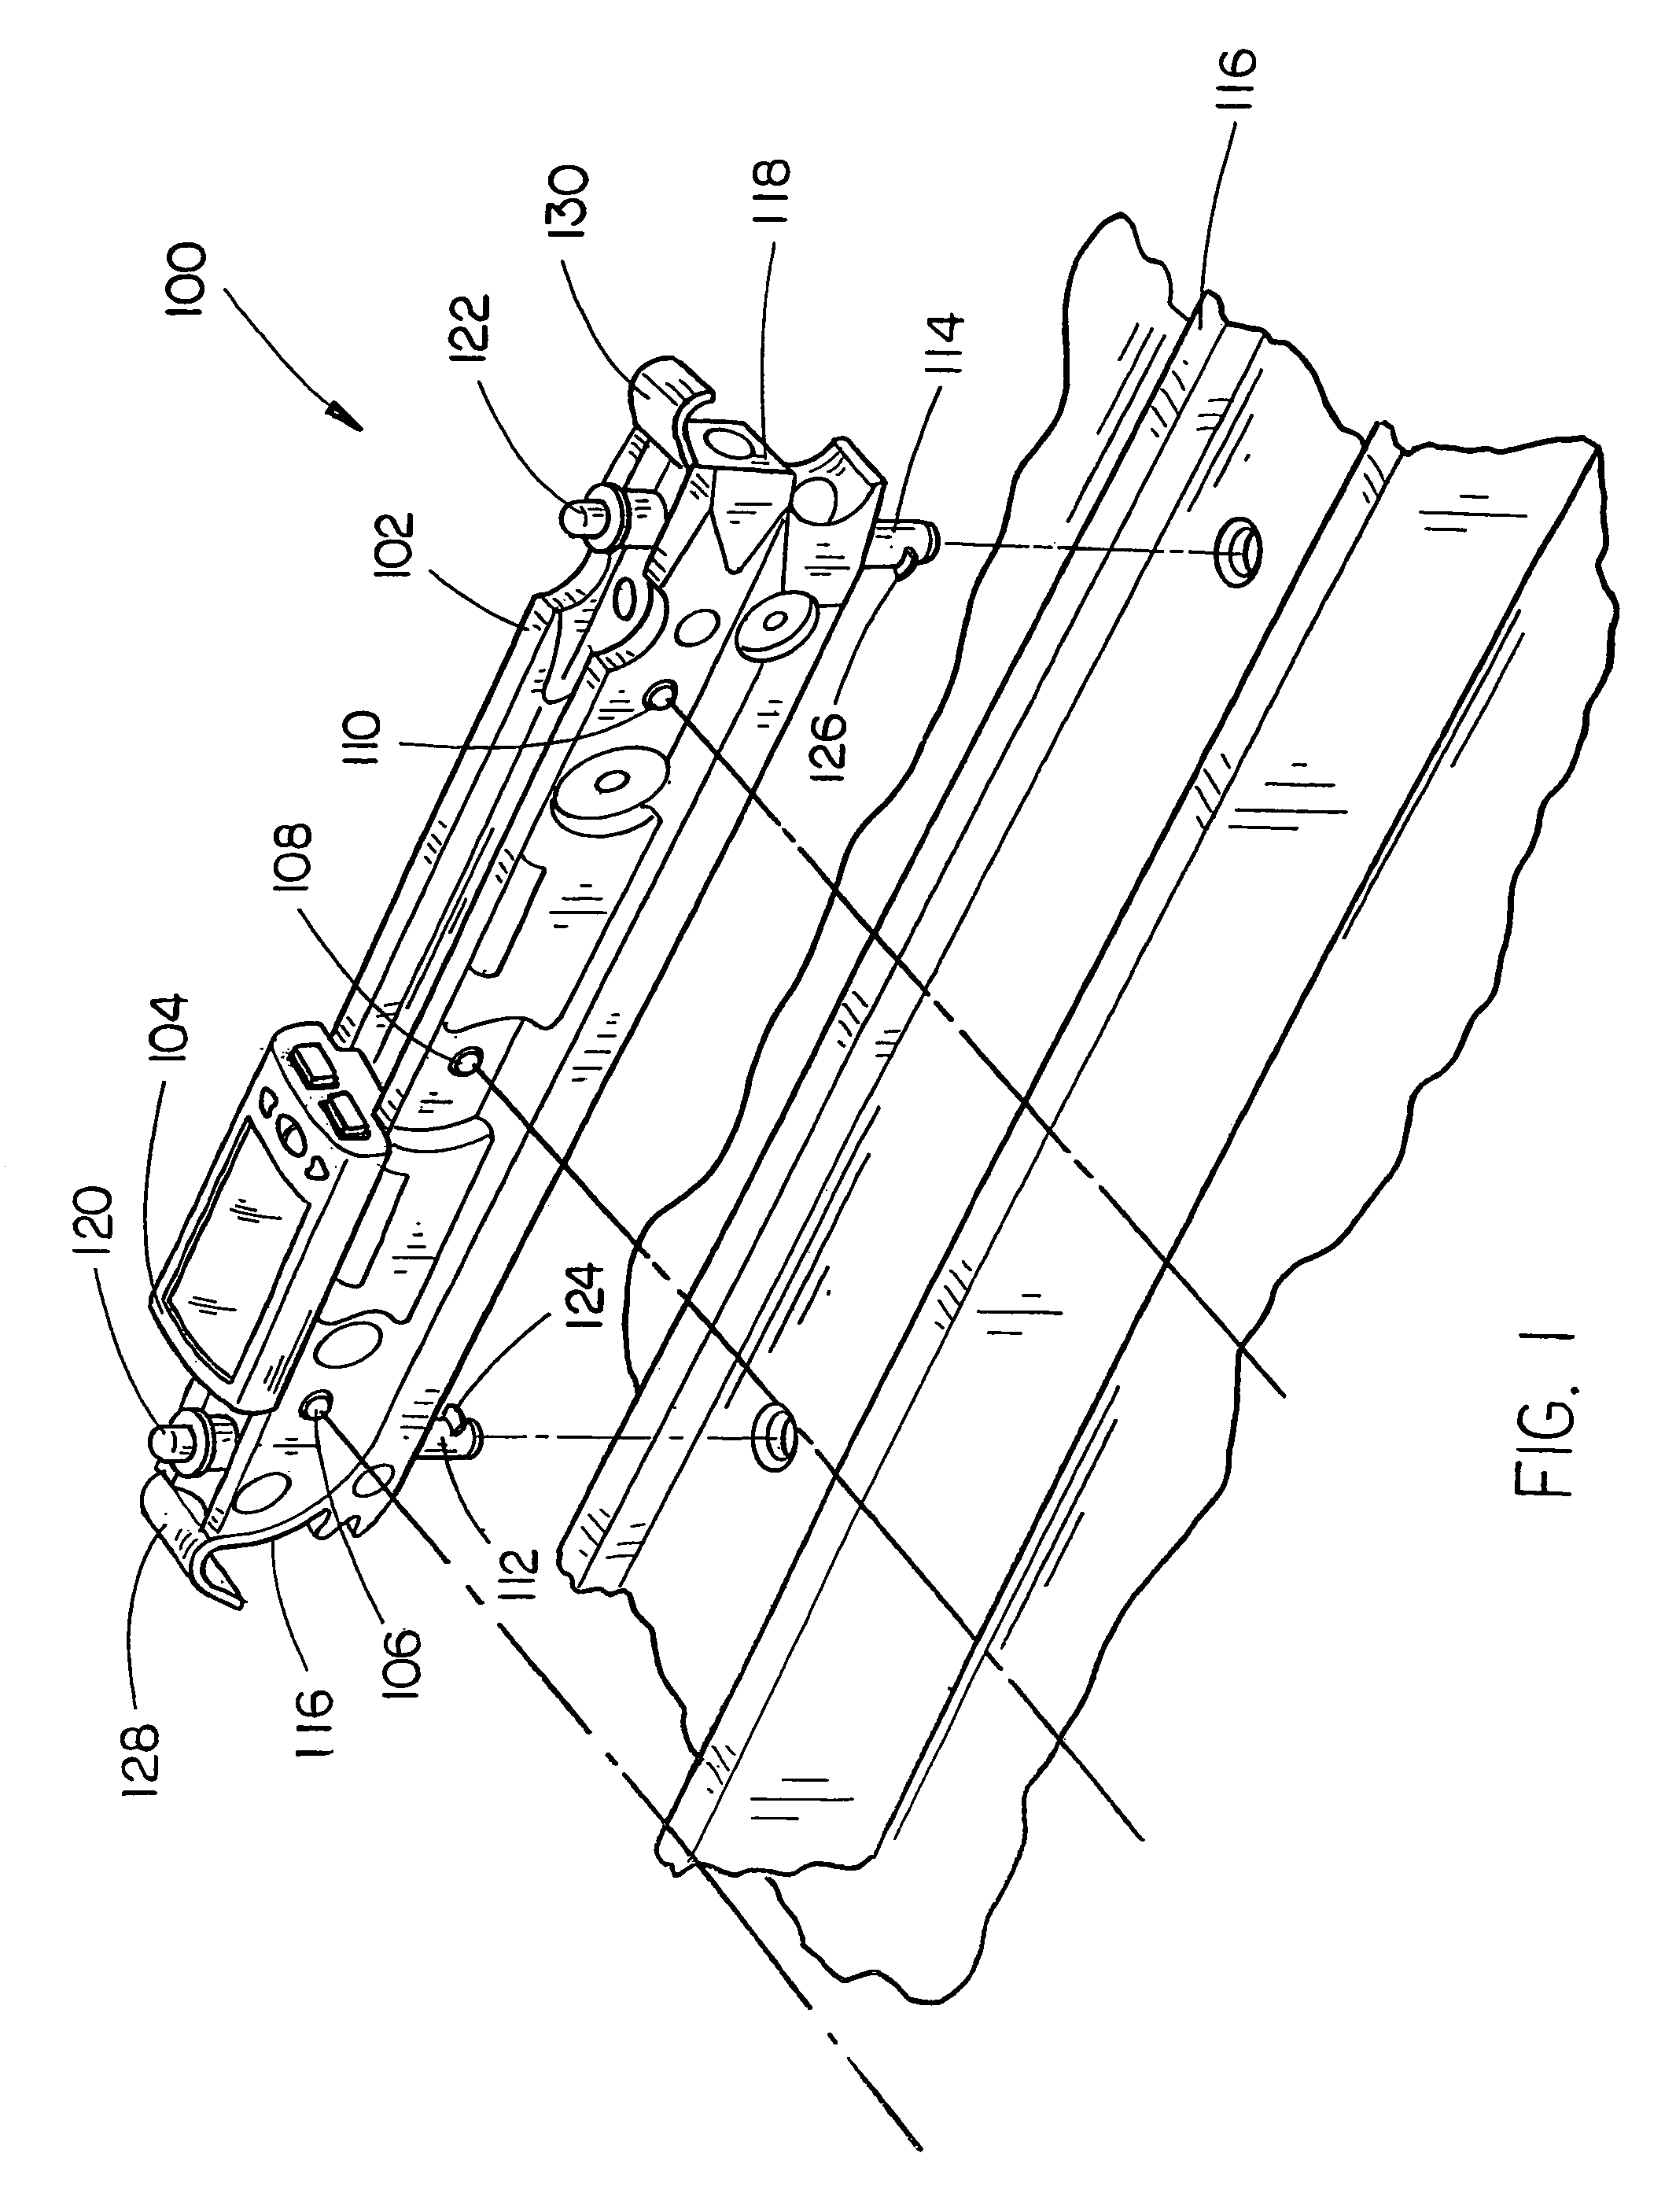 Measurement and alignment device including a display system